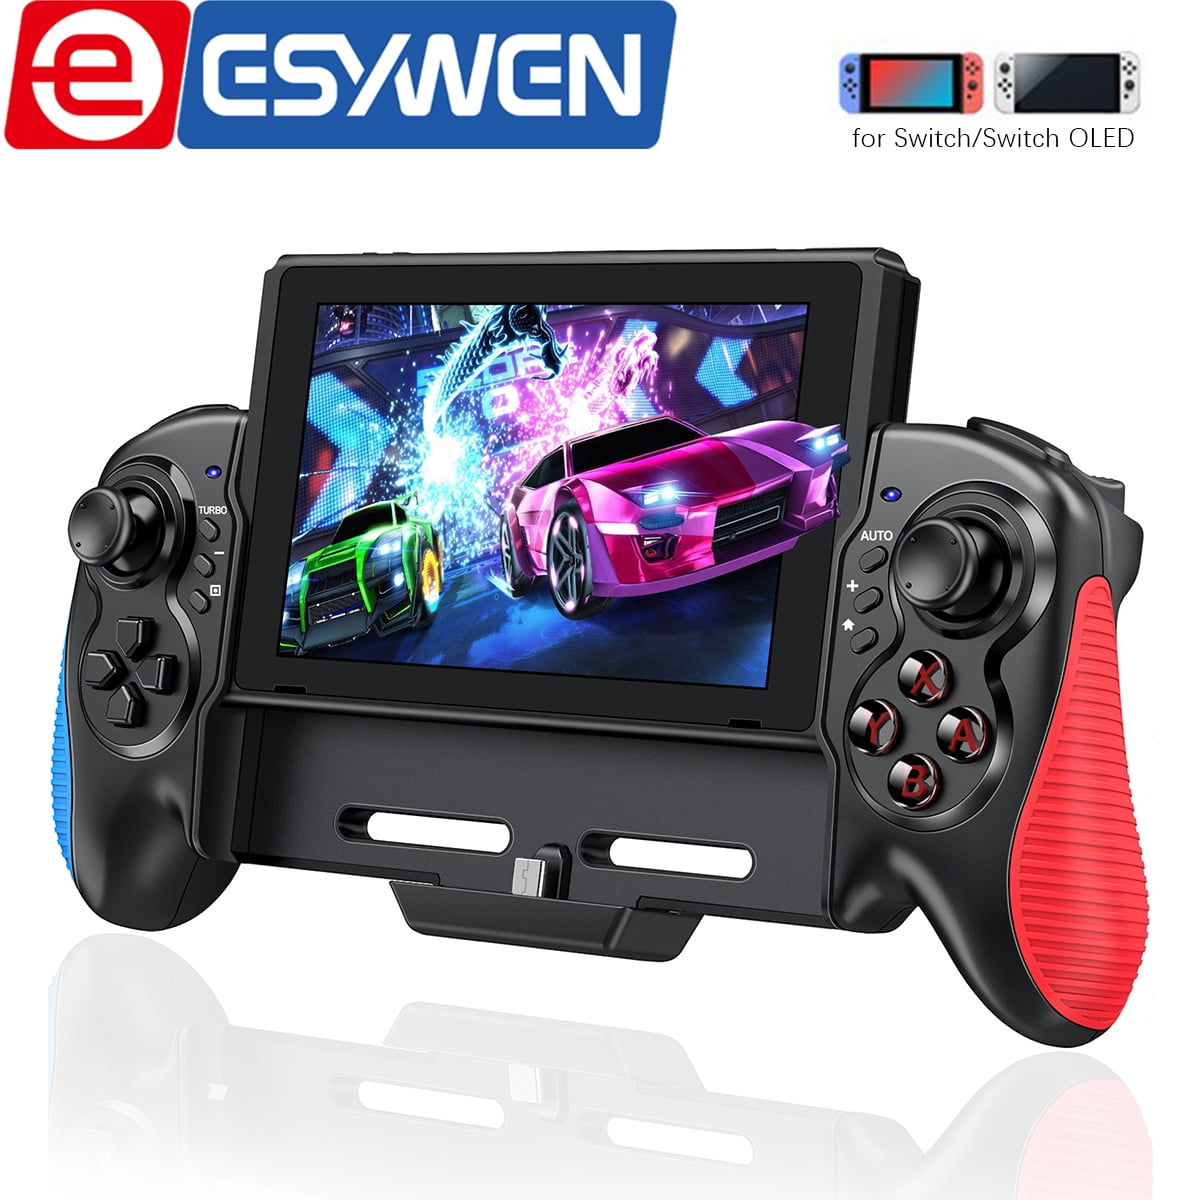 Elskede Intensiv Følg os Joypad for Nintendo Switch/OLED Joy Cons, ESYWEN Replacement for Switch Joy  Cons with Handheld Grip Double Motor Vibration Built-in 6-Axis Gyro  Joystick,Replacement for Nintendo Switch Controller - Walmart.com